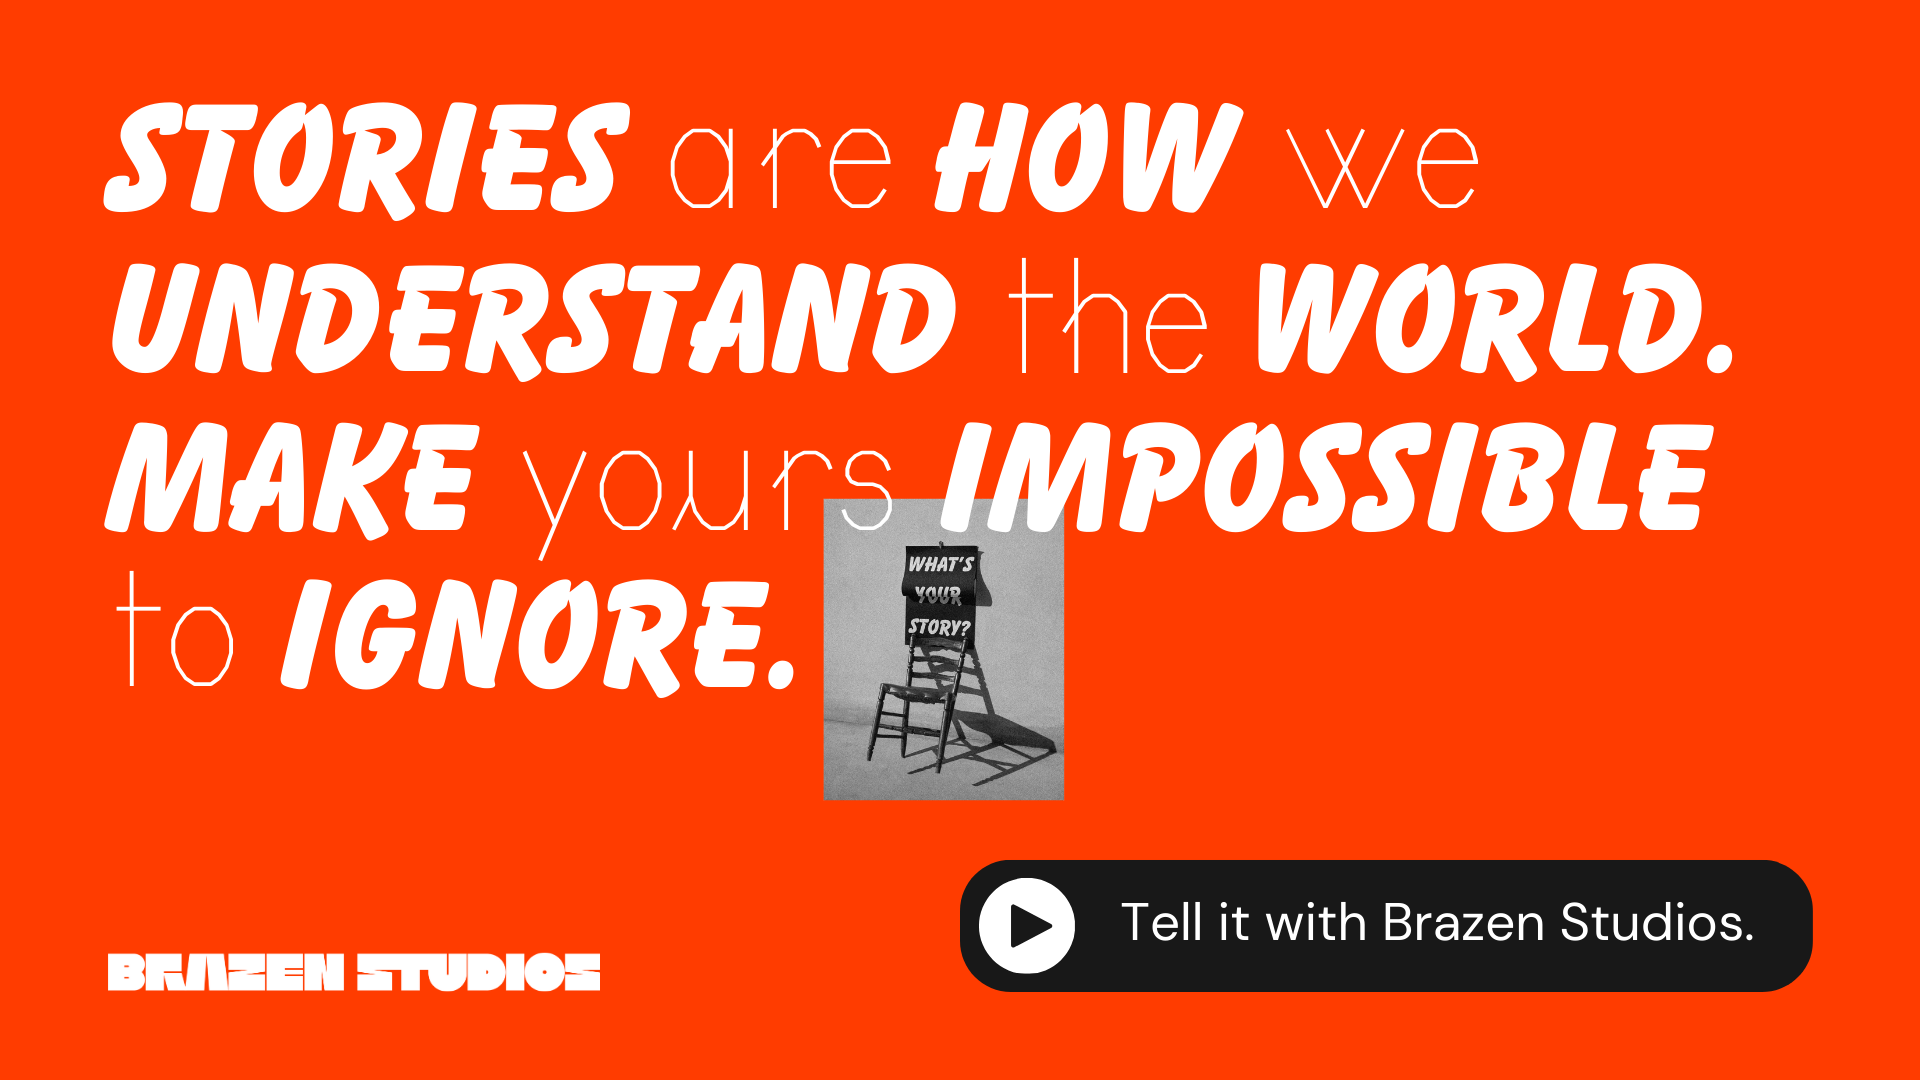 Stories are how we understand the world. Make yours impossible to ignore. Tell it with Brazen Studios.